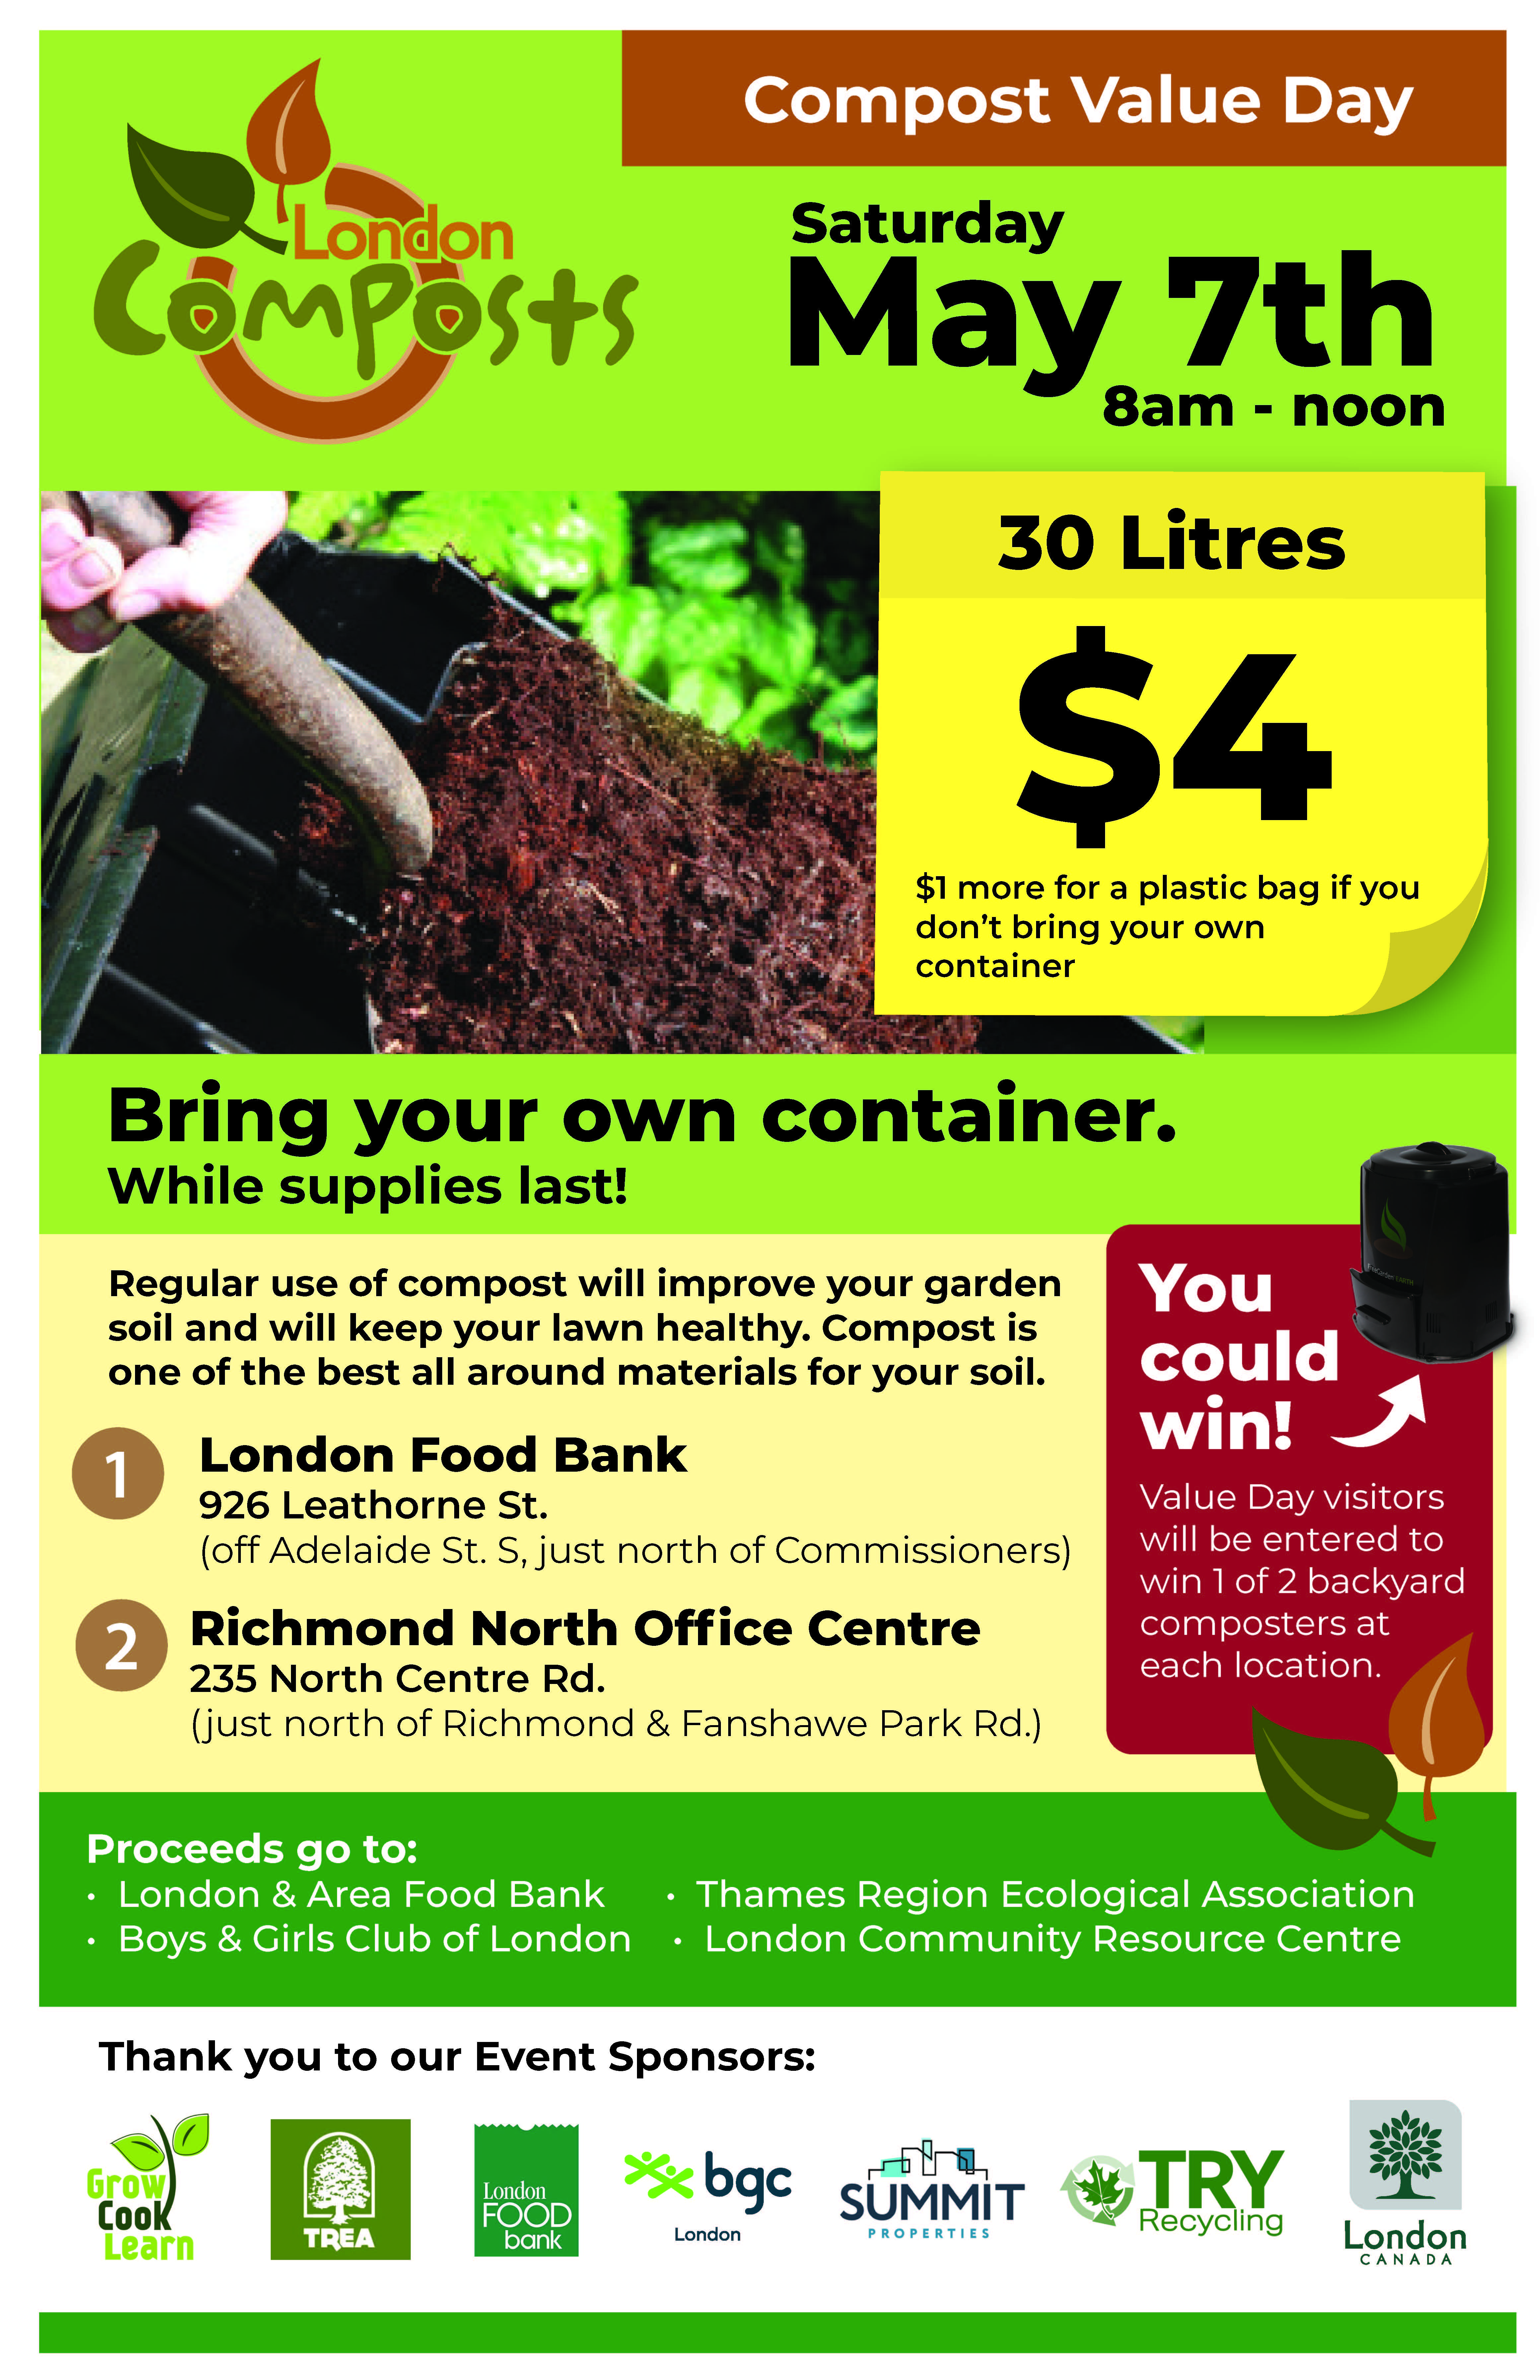 Compost Value Day is Saturday, May 7 from 8:00 a.m. to noon. $4 for 30 litres if you bring your own containers. While supplies last. Two locations: London Food Bank at 926 Leathorne Street and Richmond North Office Centre at 235 North Centre Road.